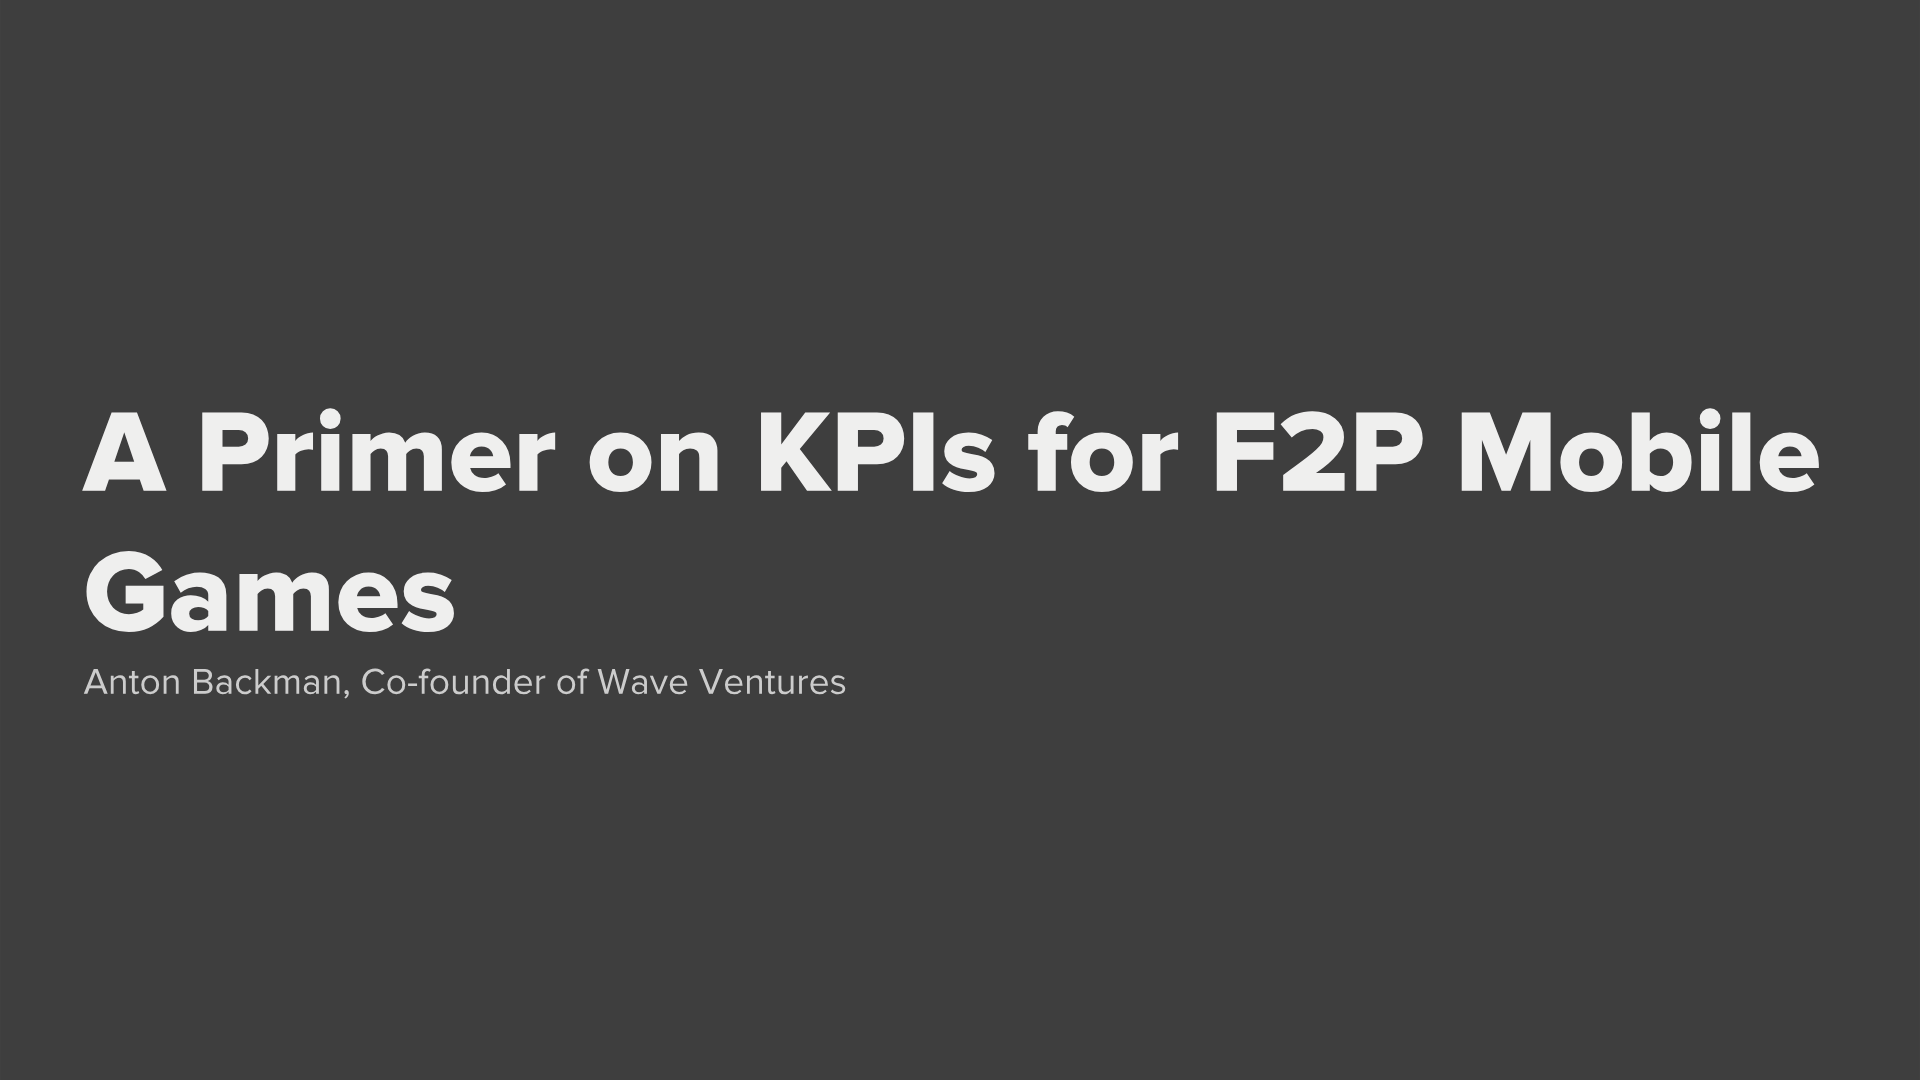 A Primer on KPIs for F2P Mobile Games by Anton Backman Medium